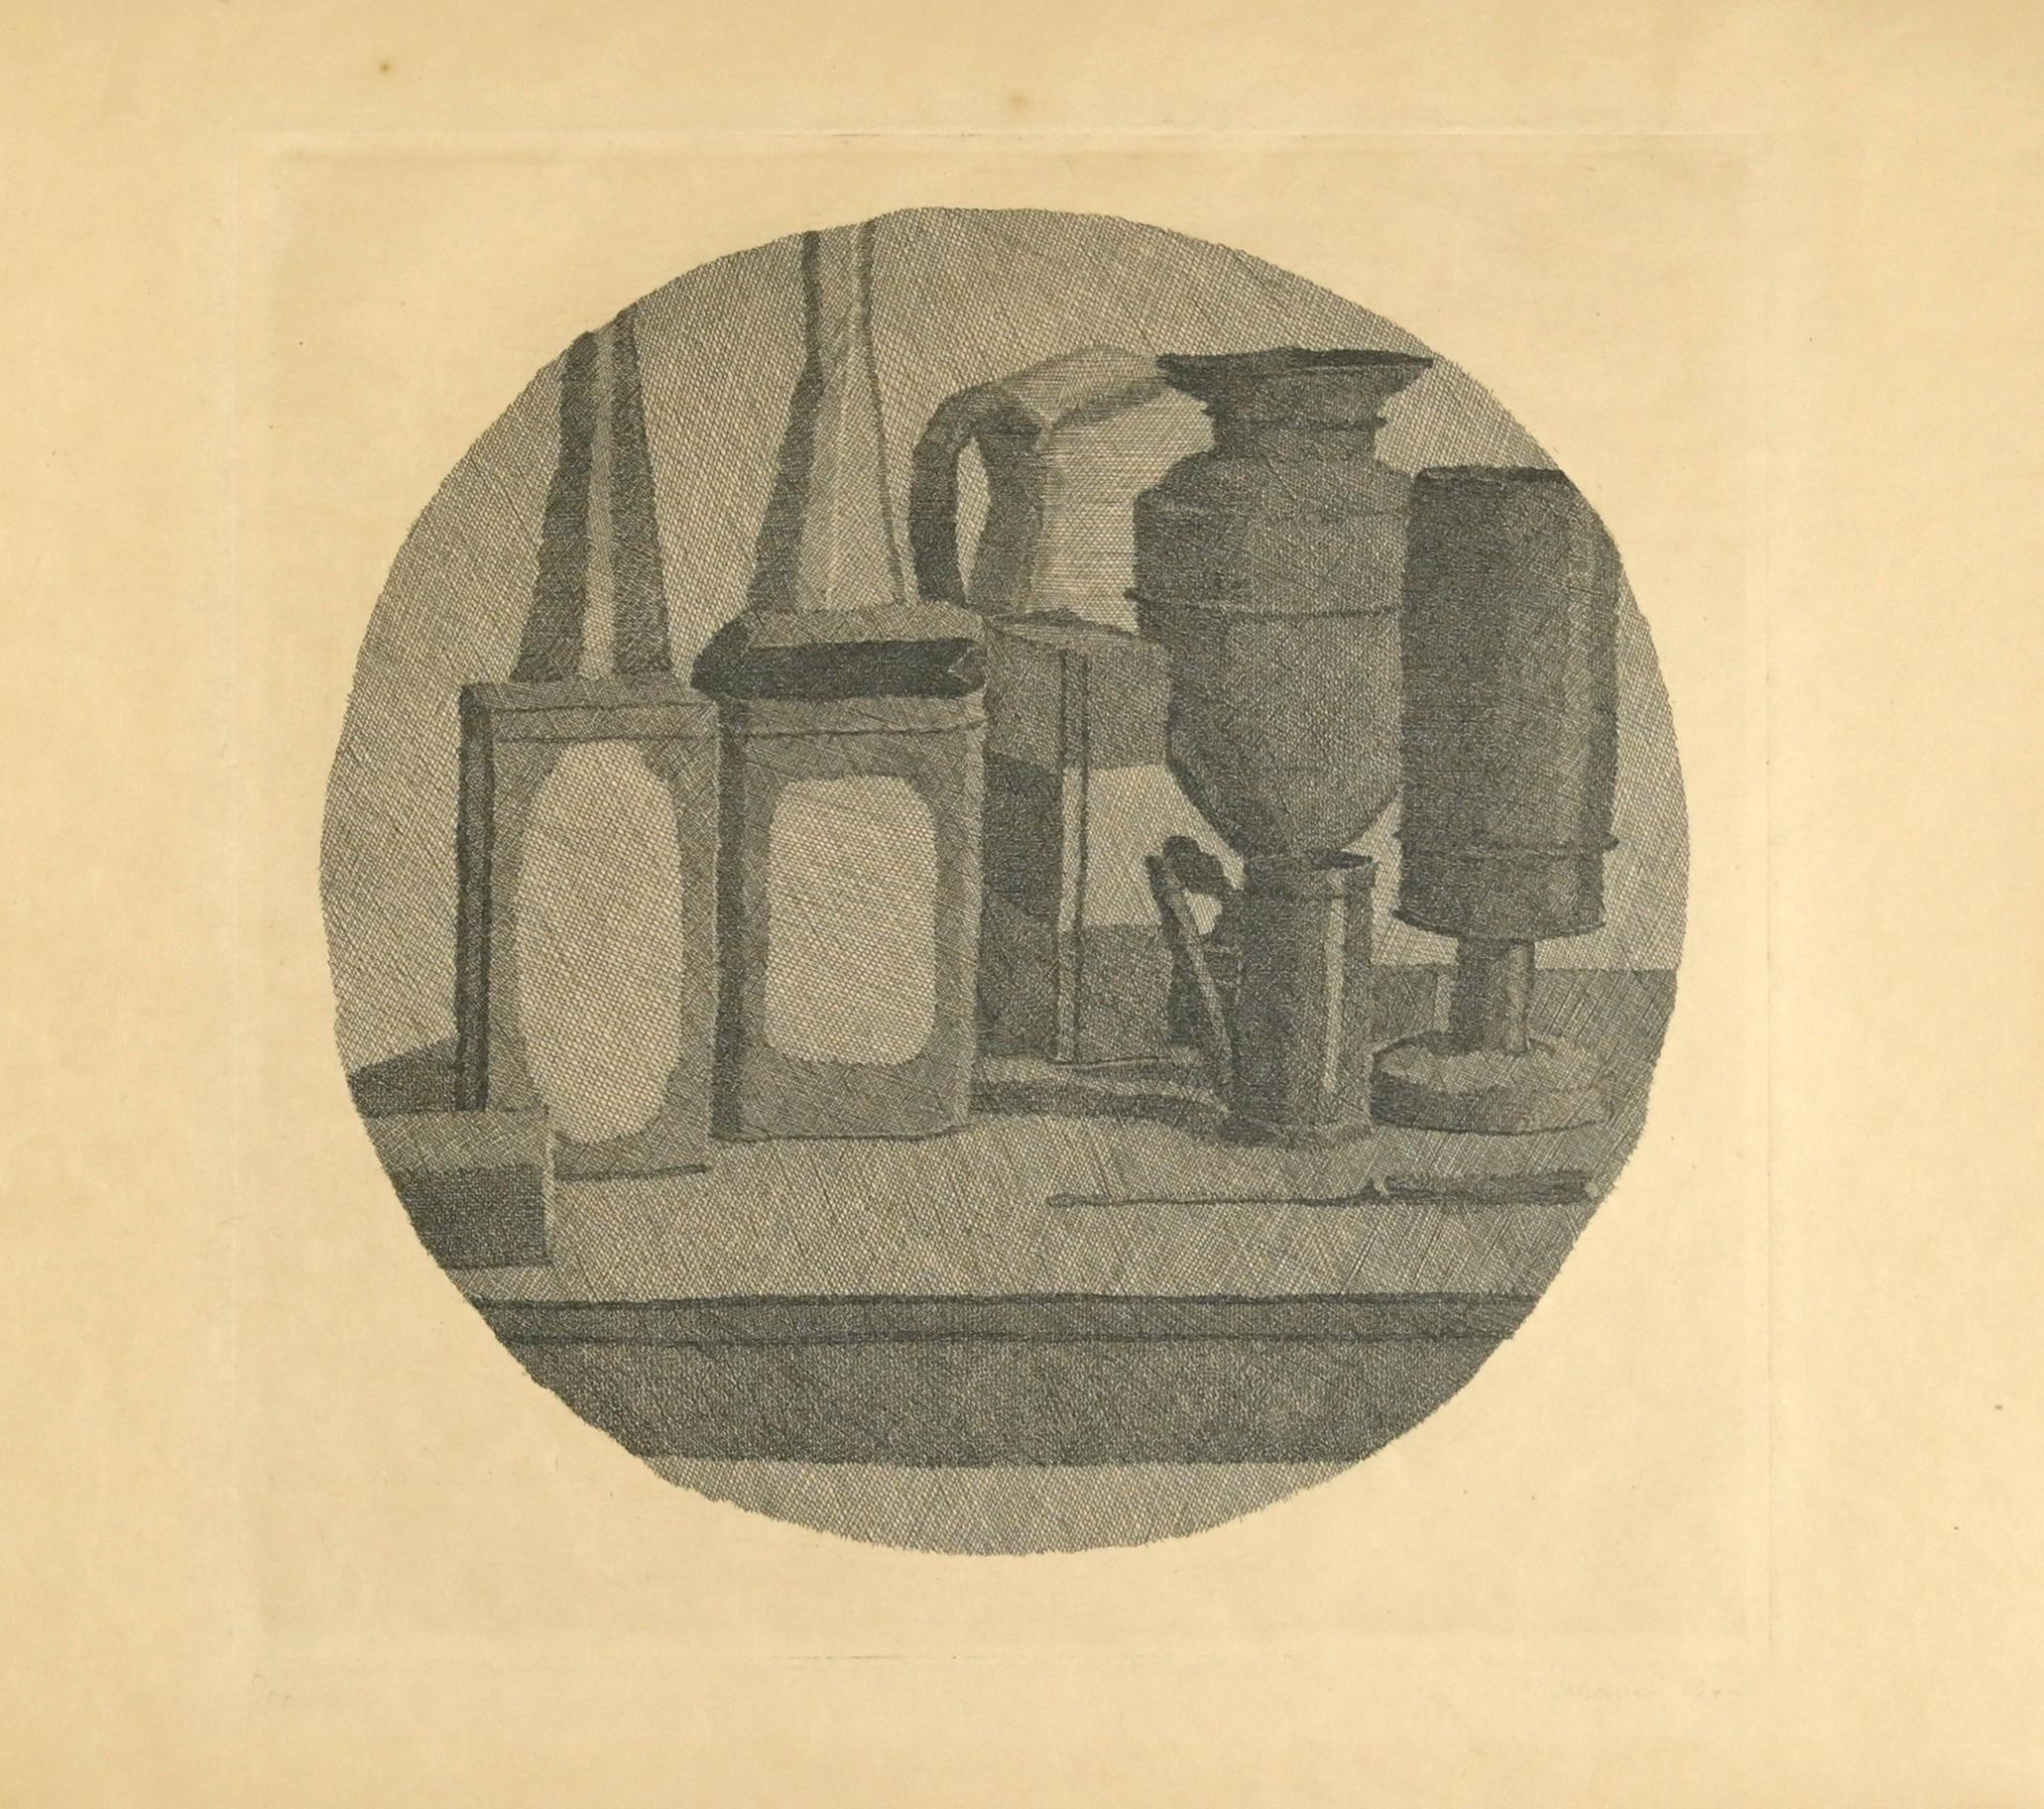 Still Life with Eleven Objetcs in a Sphere  - Etching by Giorgio Morandi - 1942